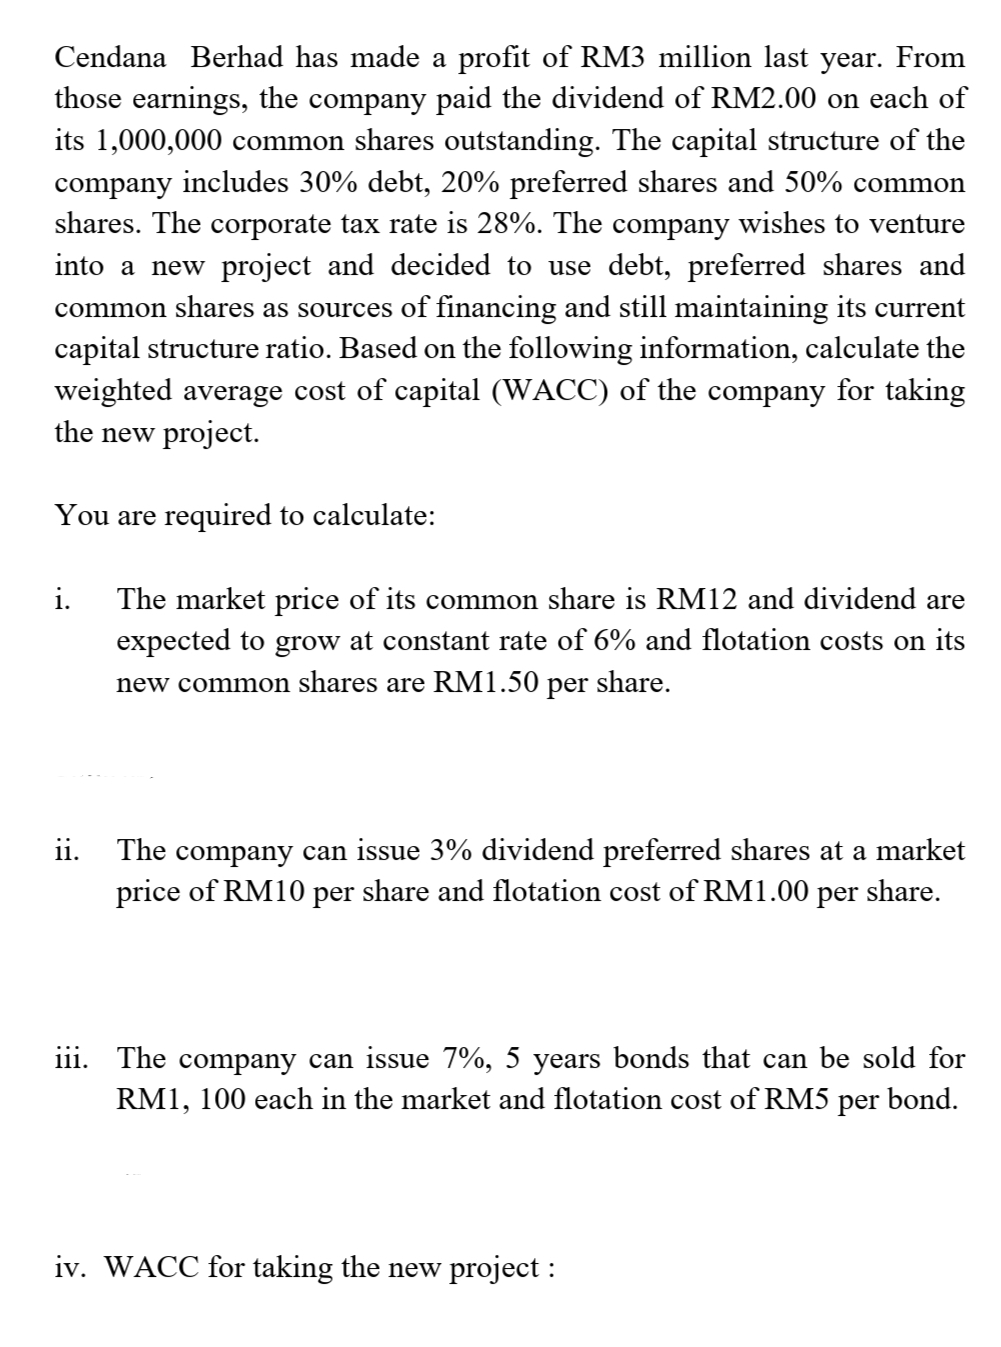 Cendana Berhad has made a profit of RM3 million last year. From
those earnings, the company paid the dividend of RM2.00 on each of
its 1,000,000 common shares outstanding. The capital structure of the
company includes 30% debt, 20% preferred shares and 50% common
shares. The corporate tax rate is 28%. The company wishes to venture
into a new project and decided to use debt, preferred shares and
common shares as sources of financing and still maintaining its current
capital structure ratio. Based on the following information, calculate the
weighted average cost of capital (WACC) of the company for taking
the new project.
You are required to calculate:
i.
The market price of its common share is RM12 and dividend are
expected to grow at constant rate of 6% and flotation costs on its
new common shares are RM1.50 per share.
ii. The company can issue 3% dividend preferred shares at a market
price of RM10 per share and flotation cost of RM1.00 per share.
iii. The company can issue 7%, 5 years bonds that can be sold for
RM1, 100 each in the market and flotation cost of RM5 per bond.
iv. WACC for taking the new project :
